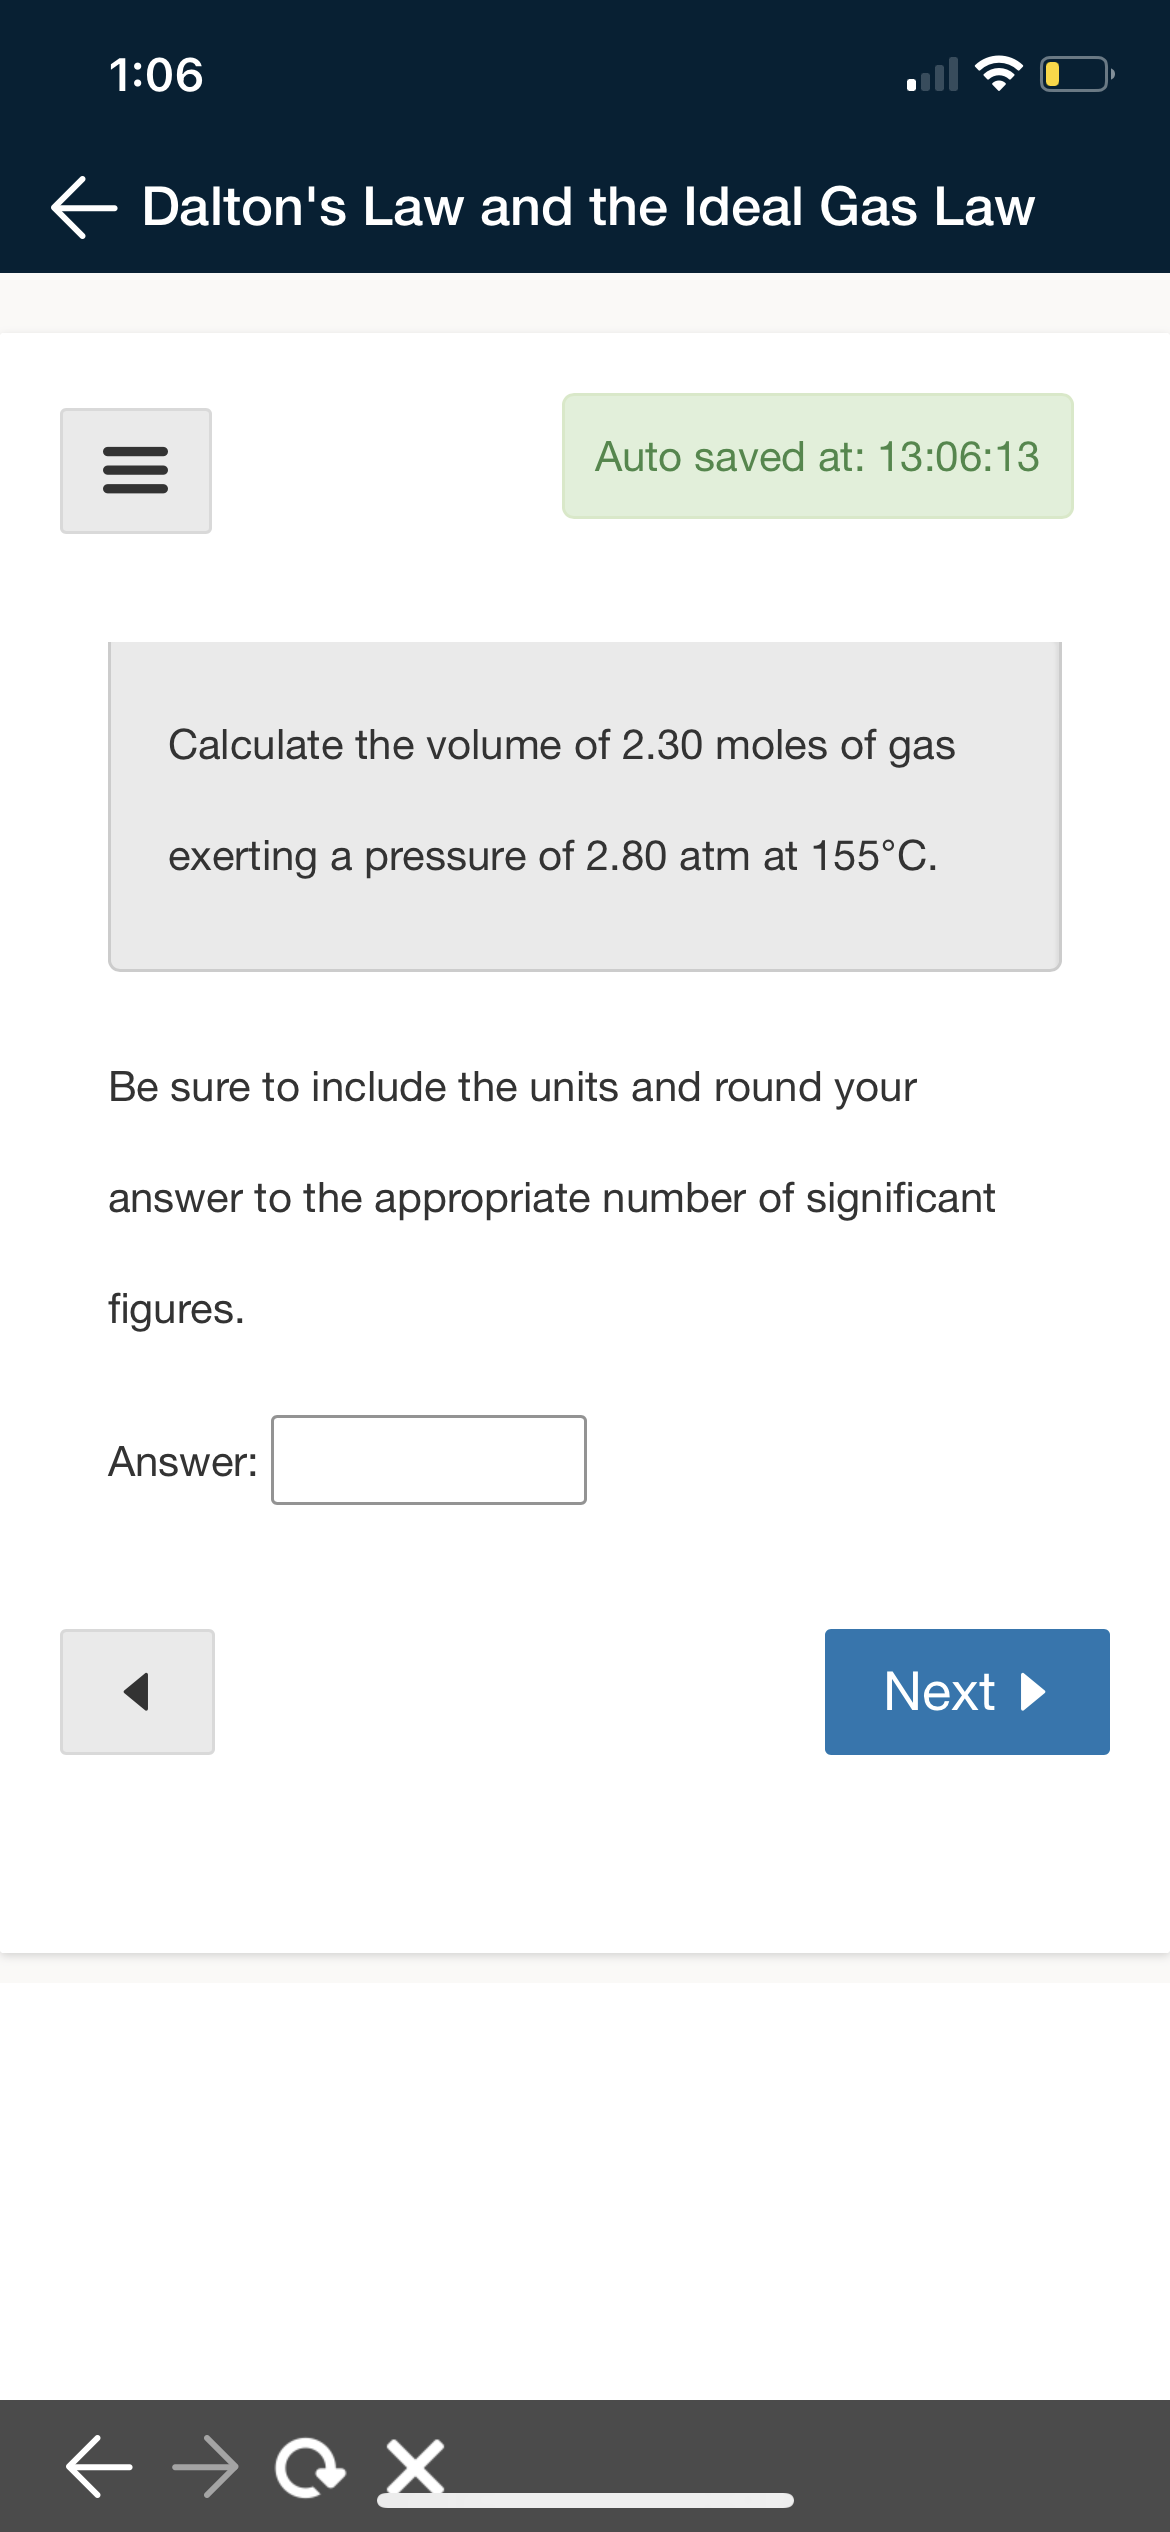 1:06
← Dalton's Law and the Ideal Gas Law
Auto saved at: 13:06:13
|||
Calculate the volume of 2.30 moles of gas
exerting a pressure of 2.80 atm at 155°C.
Be sure to include the units and round your
answer to the appropriate number of significant
figures.
Answer:
Next ▶
← →@X